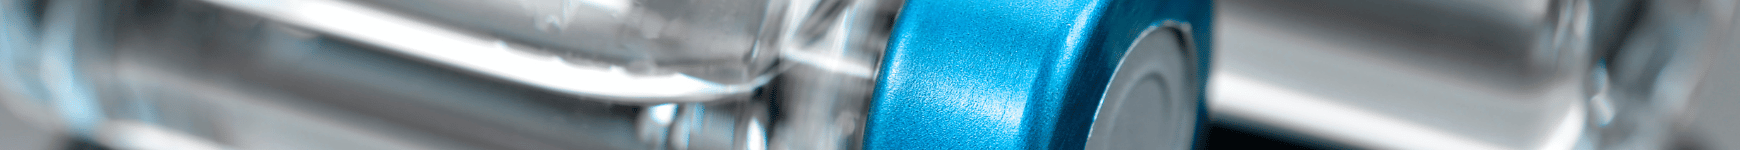 A close up of a silver and blue bicycle.